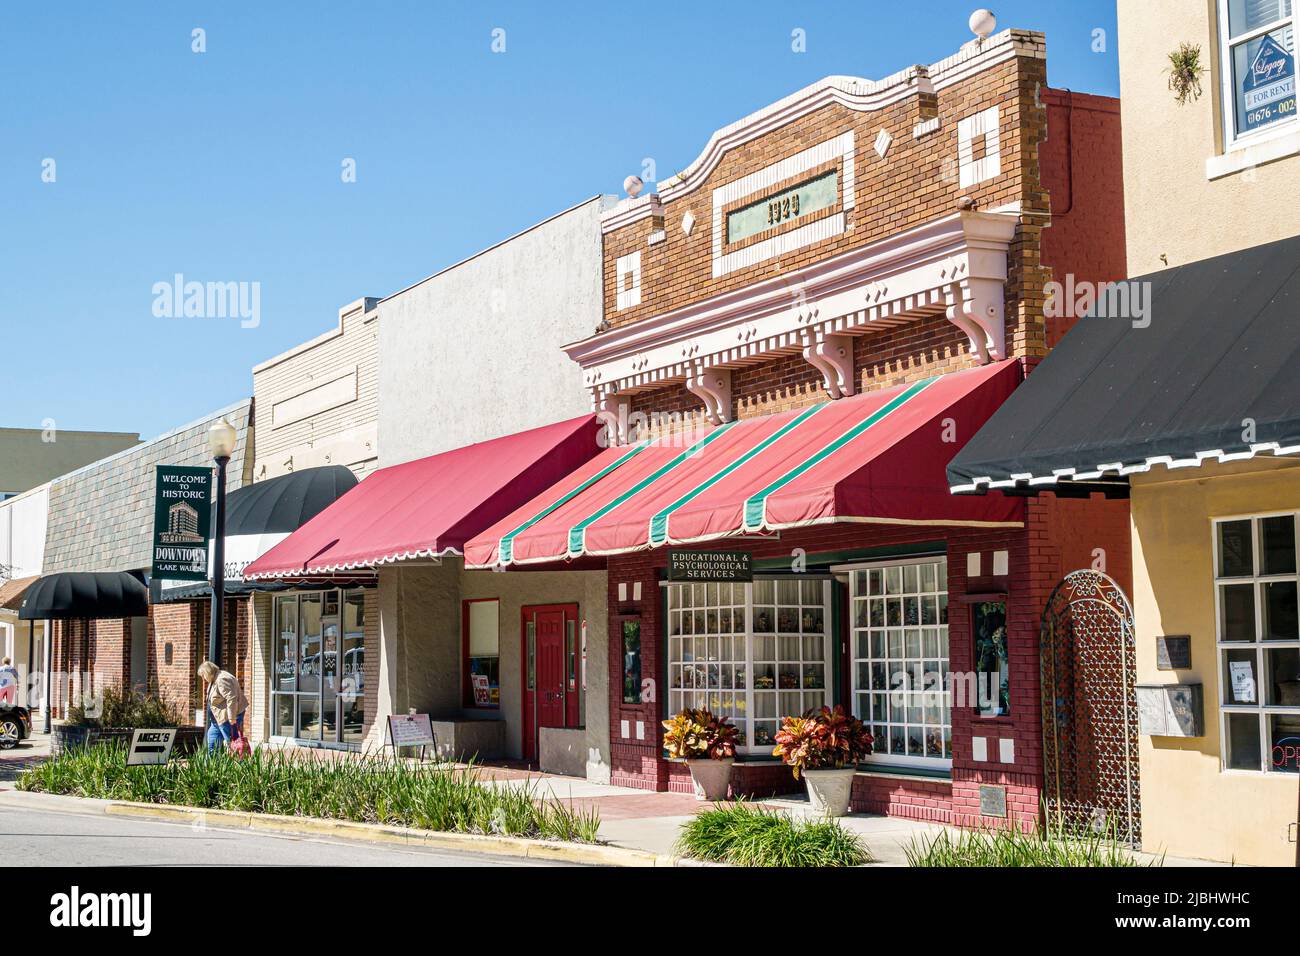 Lake Wales Florida,East Central Avenue,historic stores businesses business district main street downtown Stock Photo